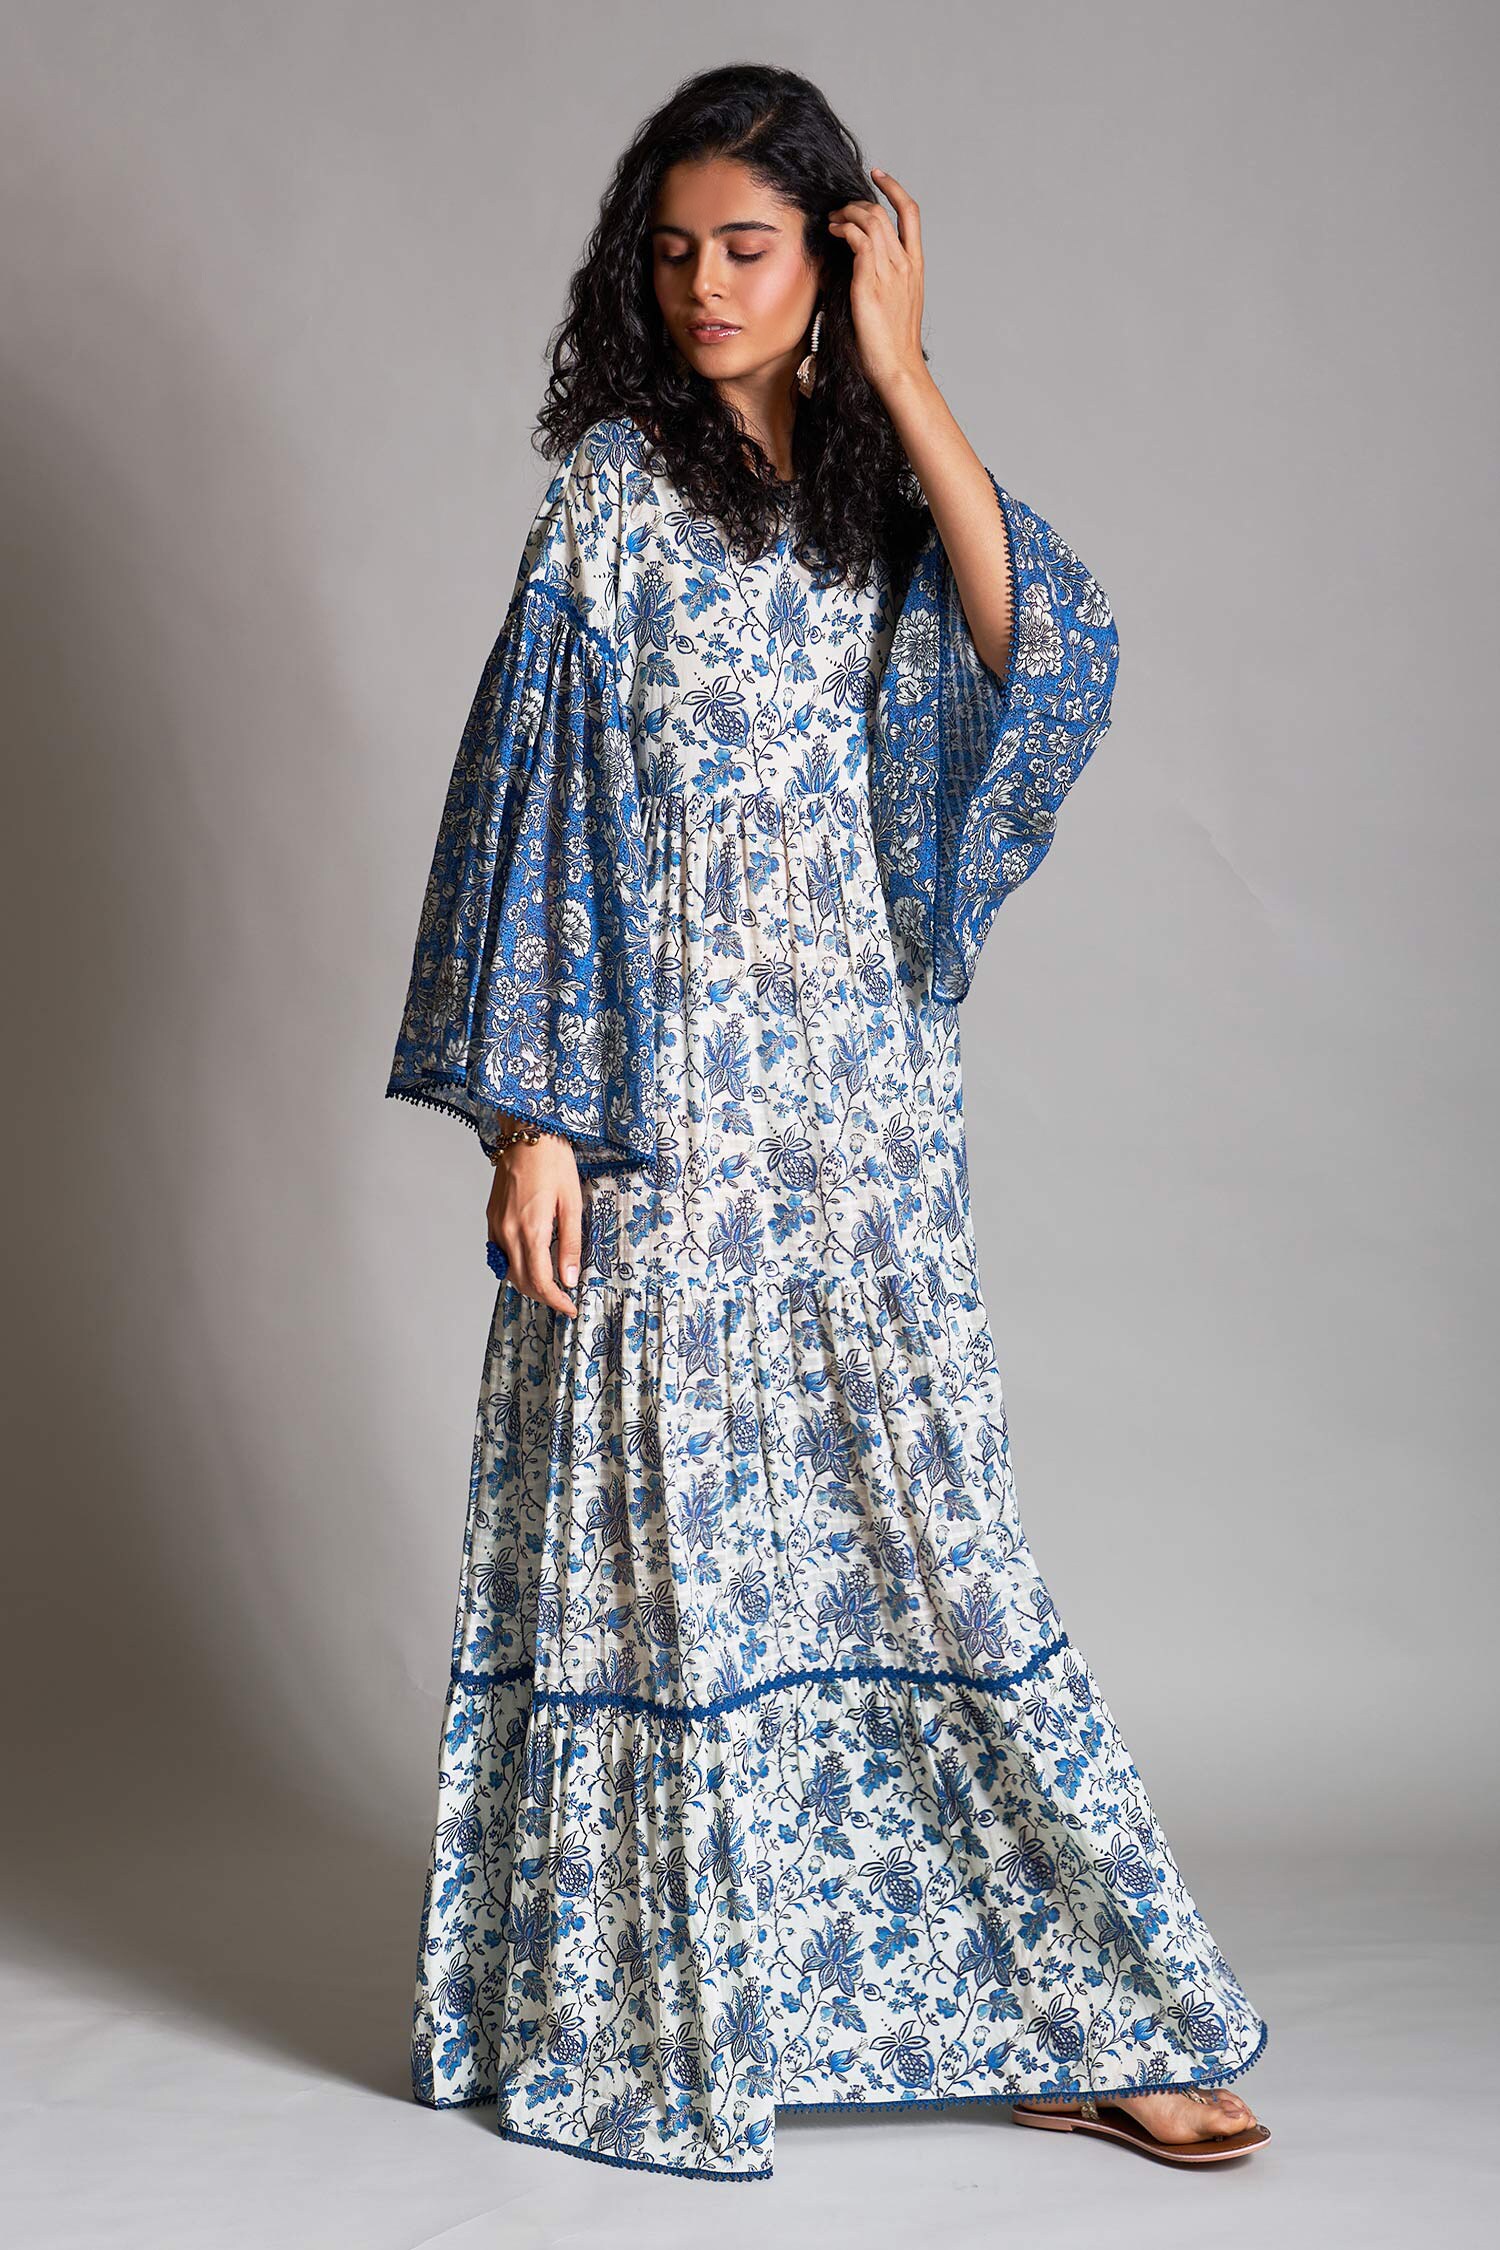 Buy White Cotton Dobby Boat Printed Dress For Women by Payal Jain ...